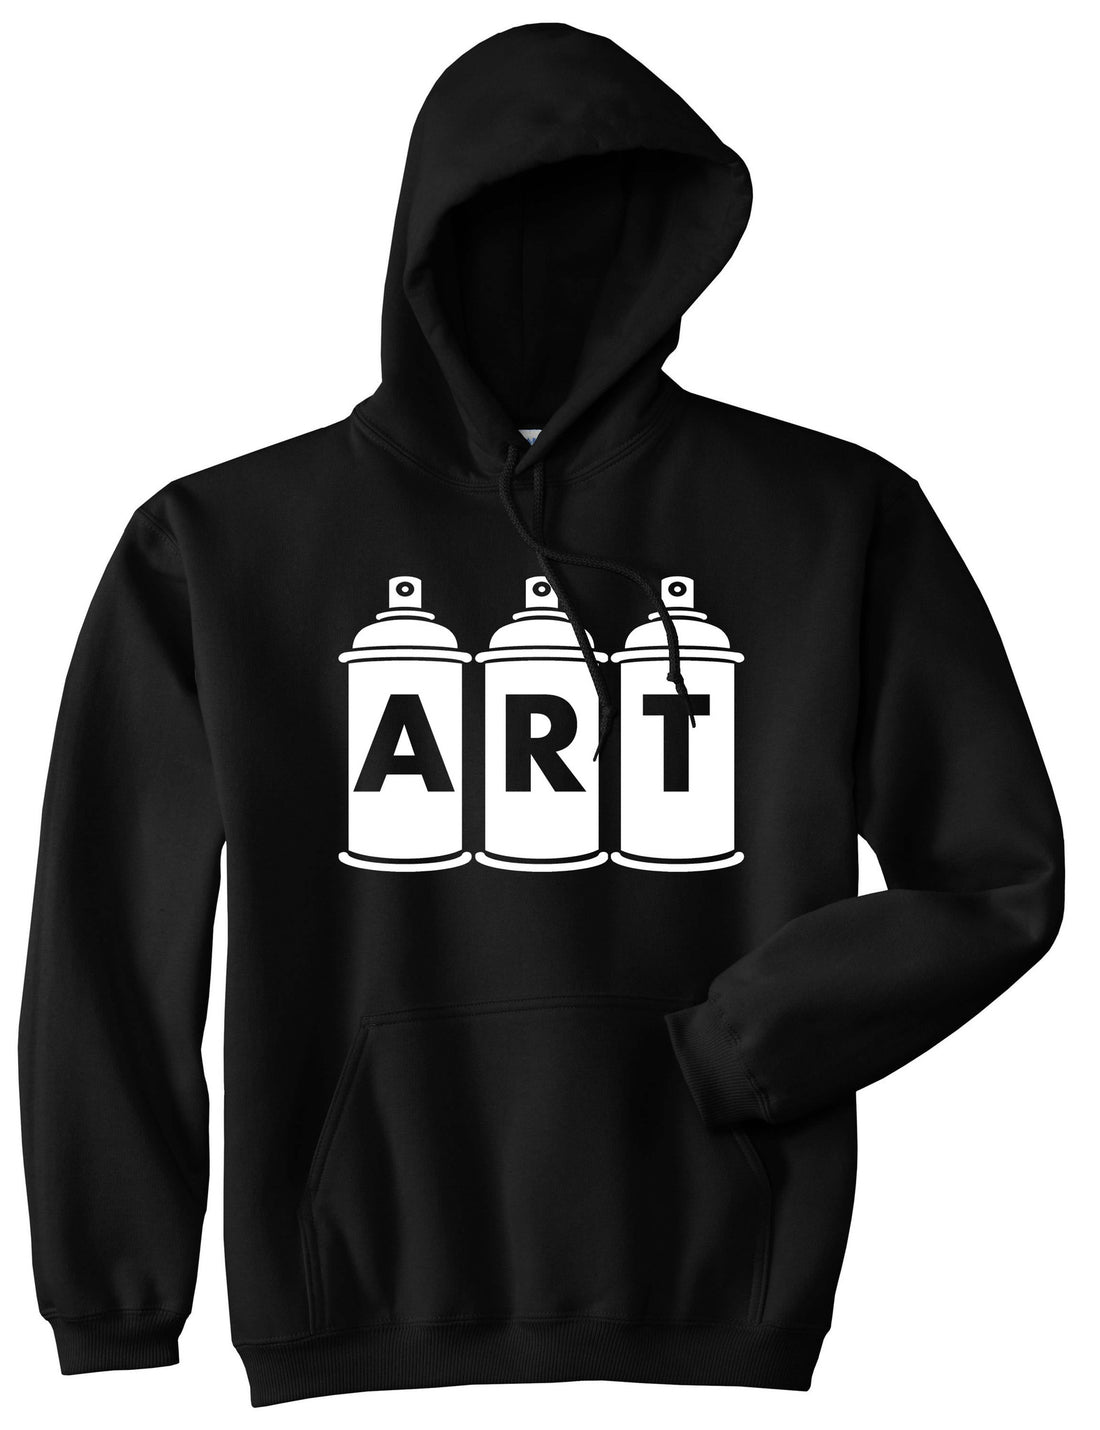 Art graf graffiti spray can paint artist Pullover Hoodie in Black By Kings Of NY